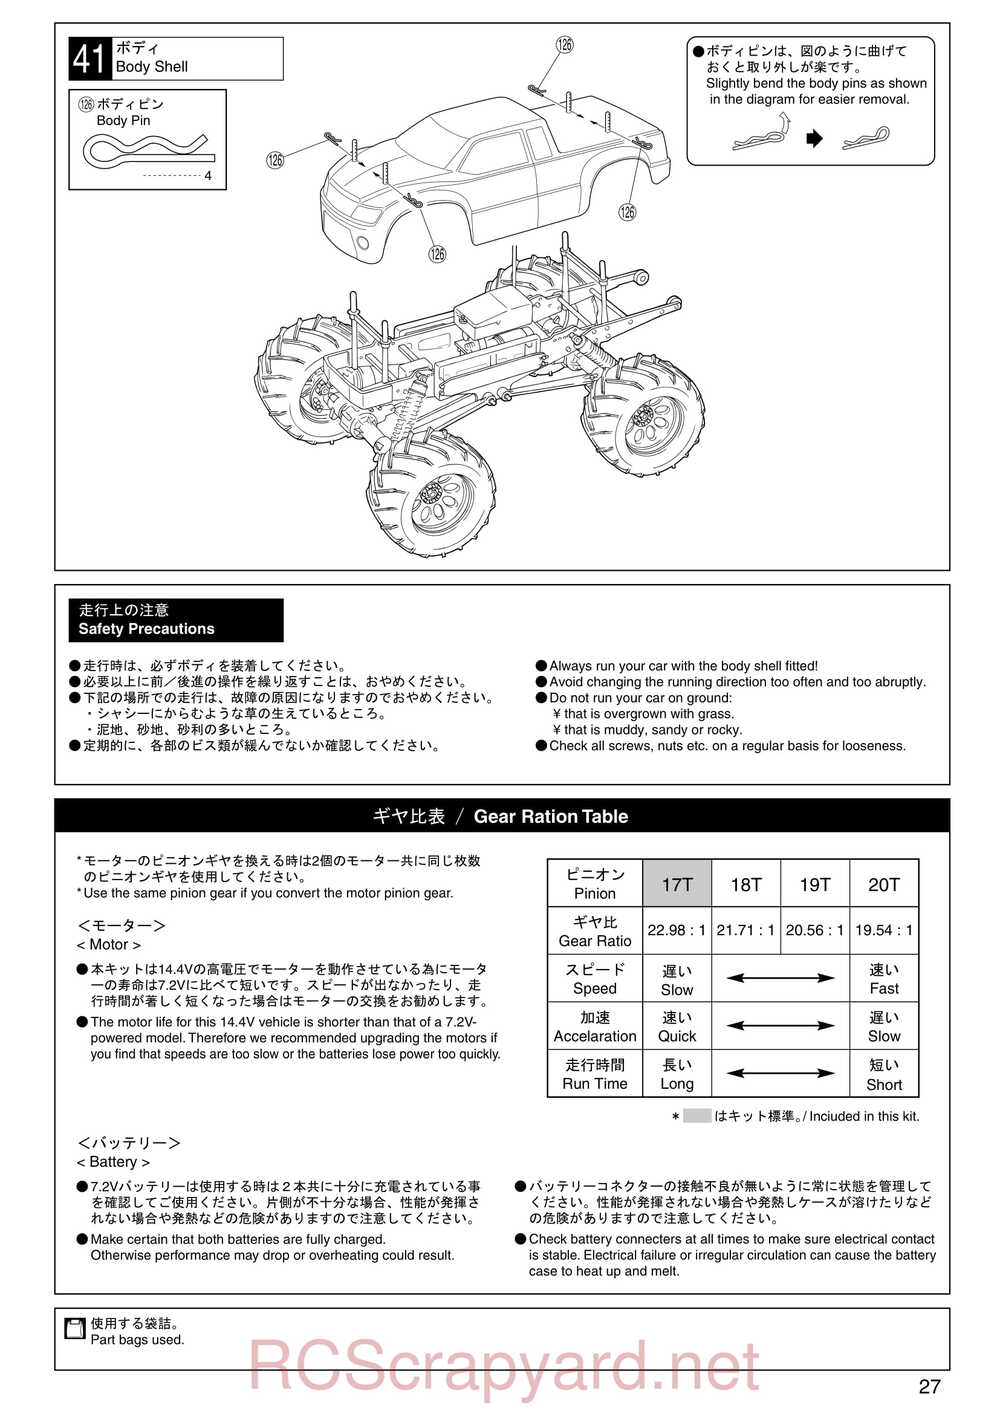 Kyosho - 30522b - Twin-Forcec-SP - Manual - Page 27